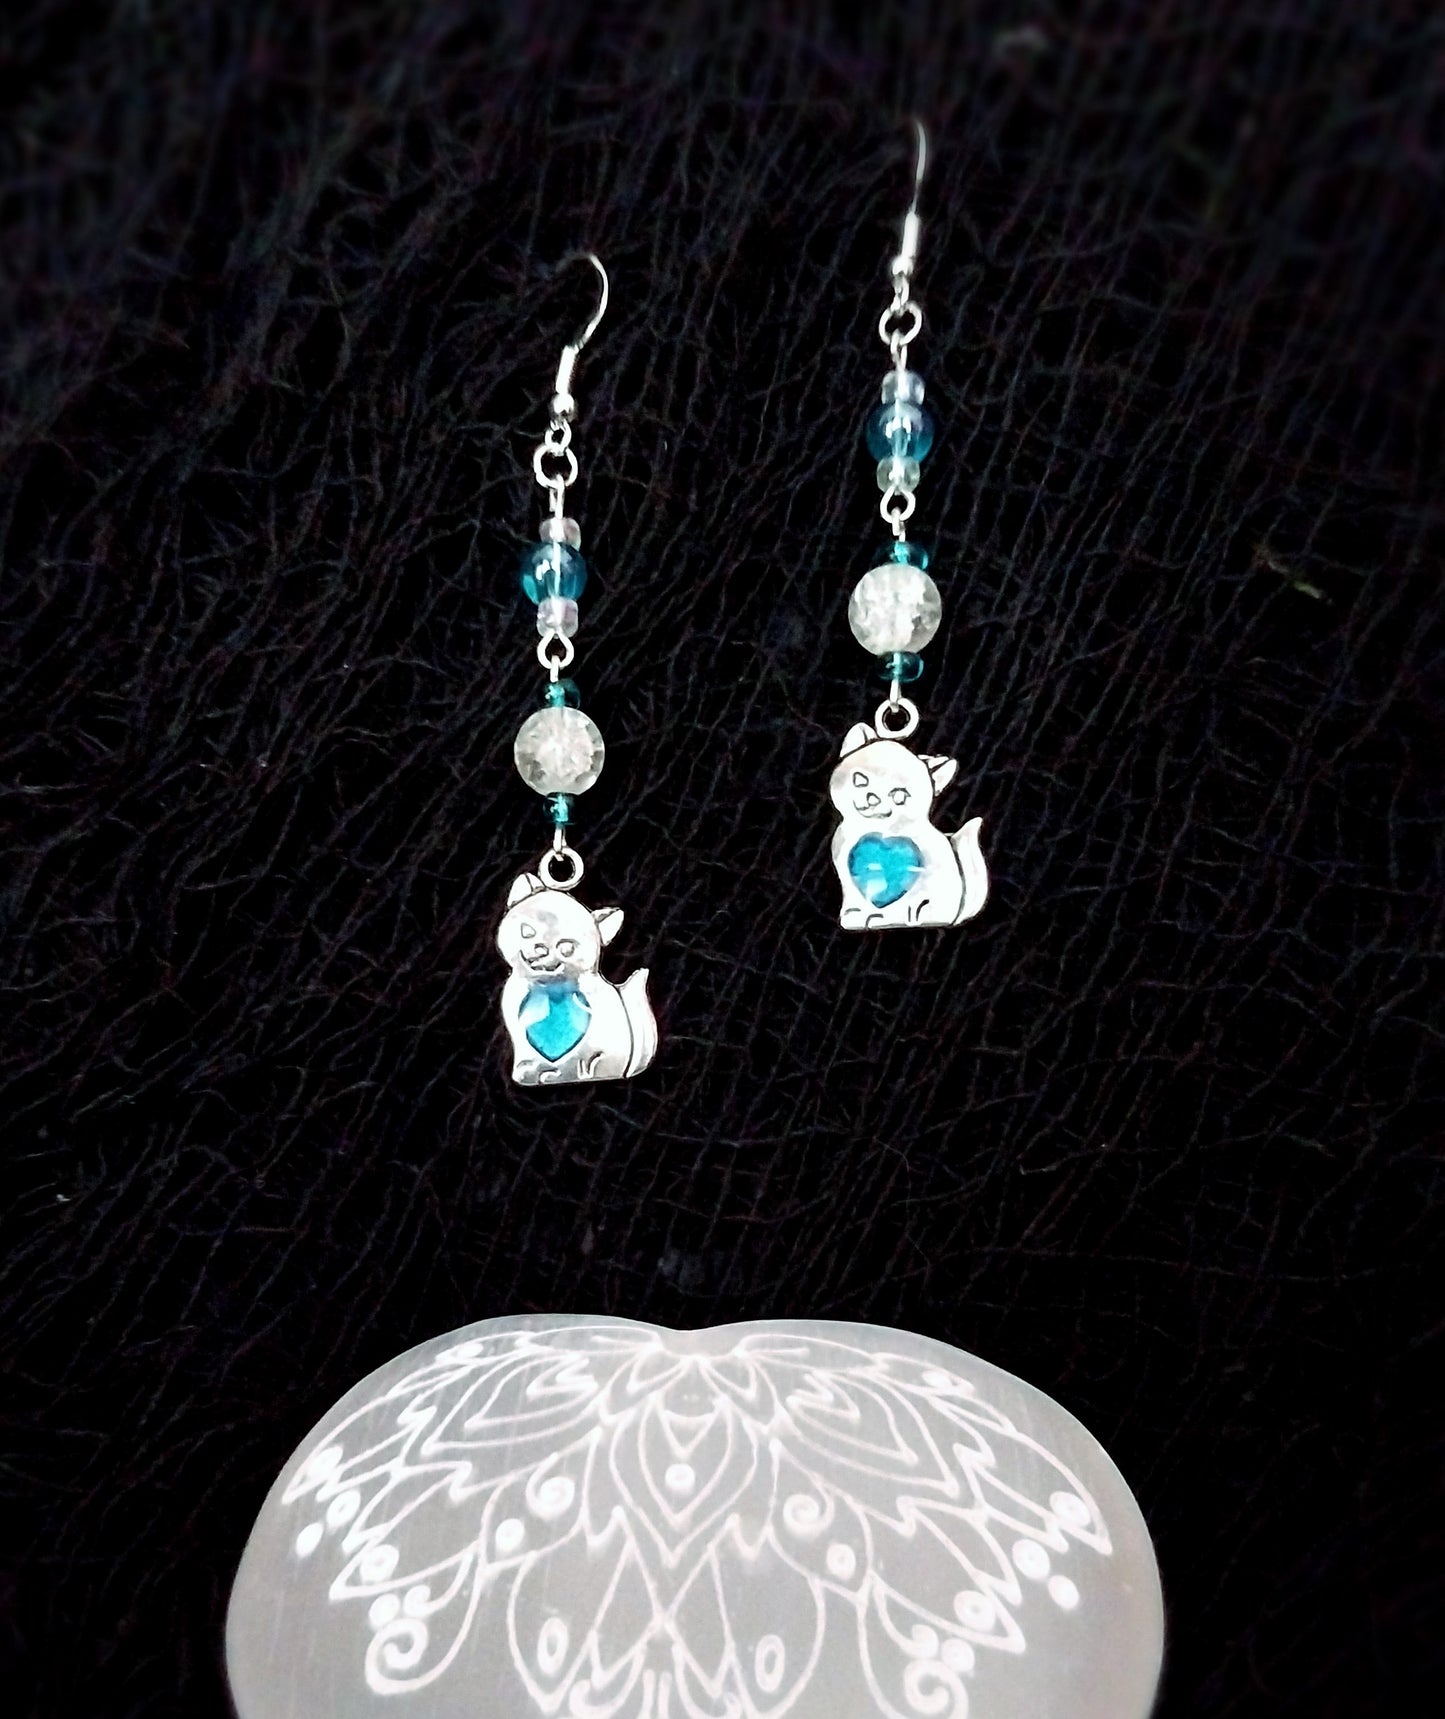 Cat Earrings With Clear Crackle and Aqua Glass Beads